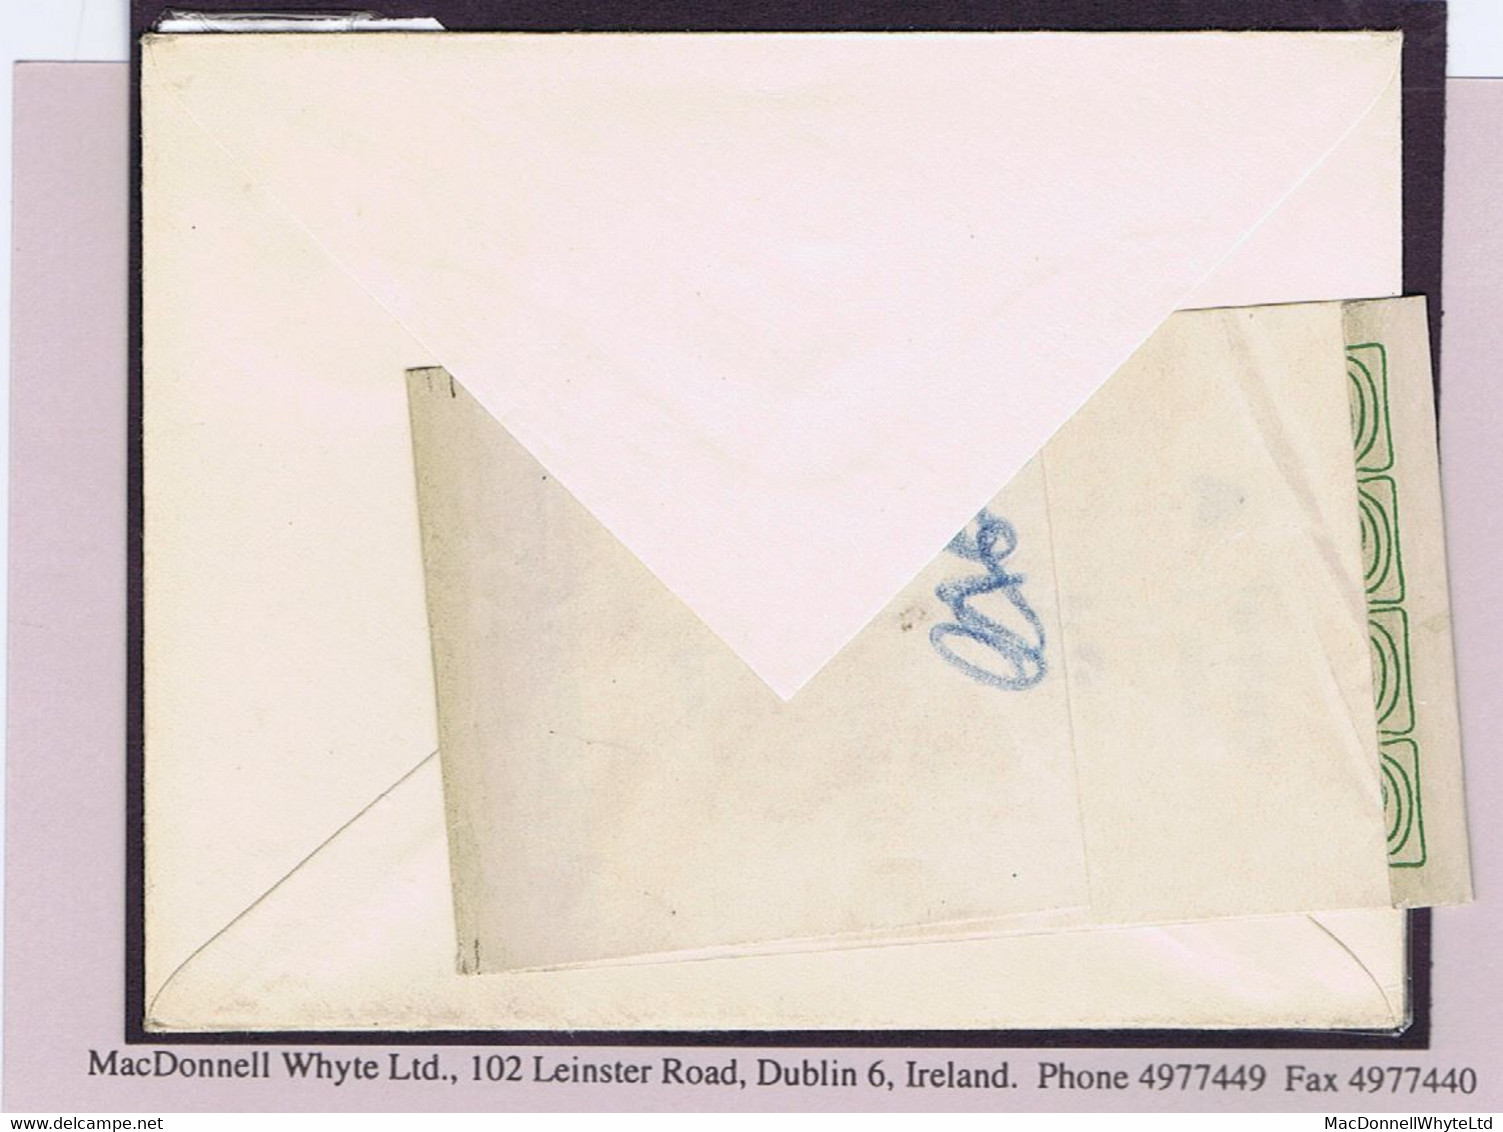 Ireland 1925 Envelope 2d Green Sharp Flap Commercial Size Unused With Original Wrapper Band 11 X 2d For 2/- - Ganzsachen